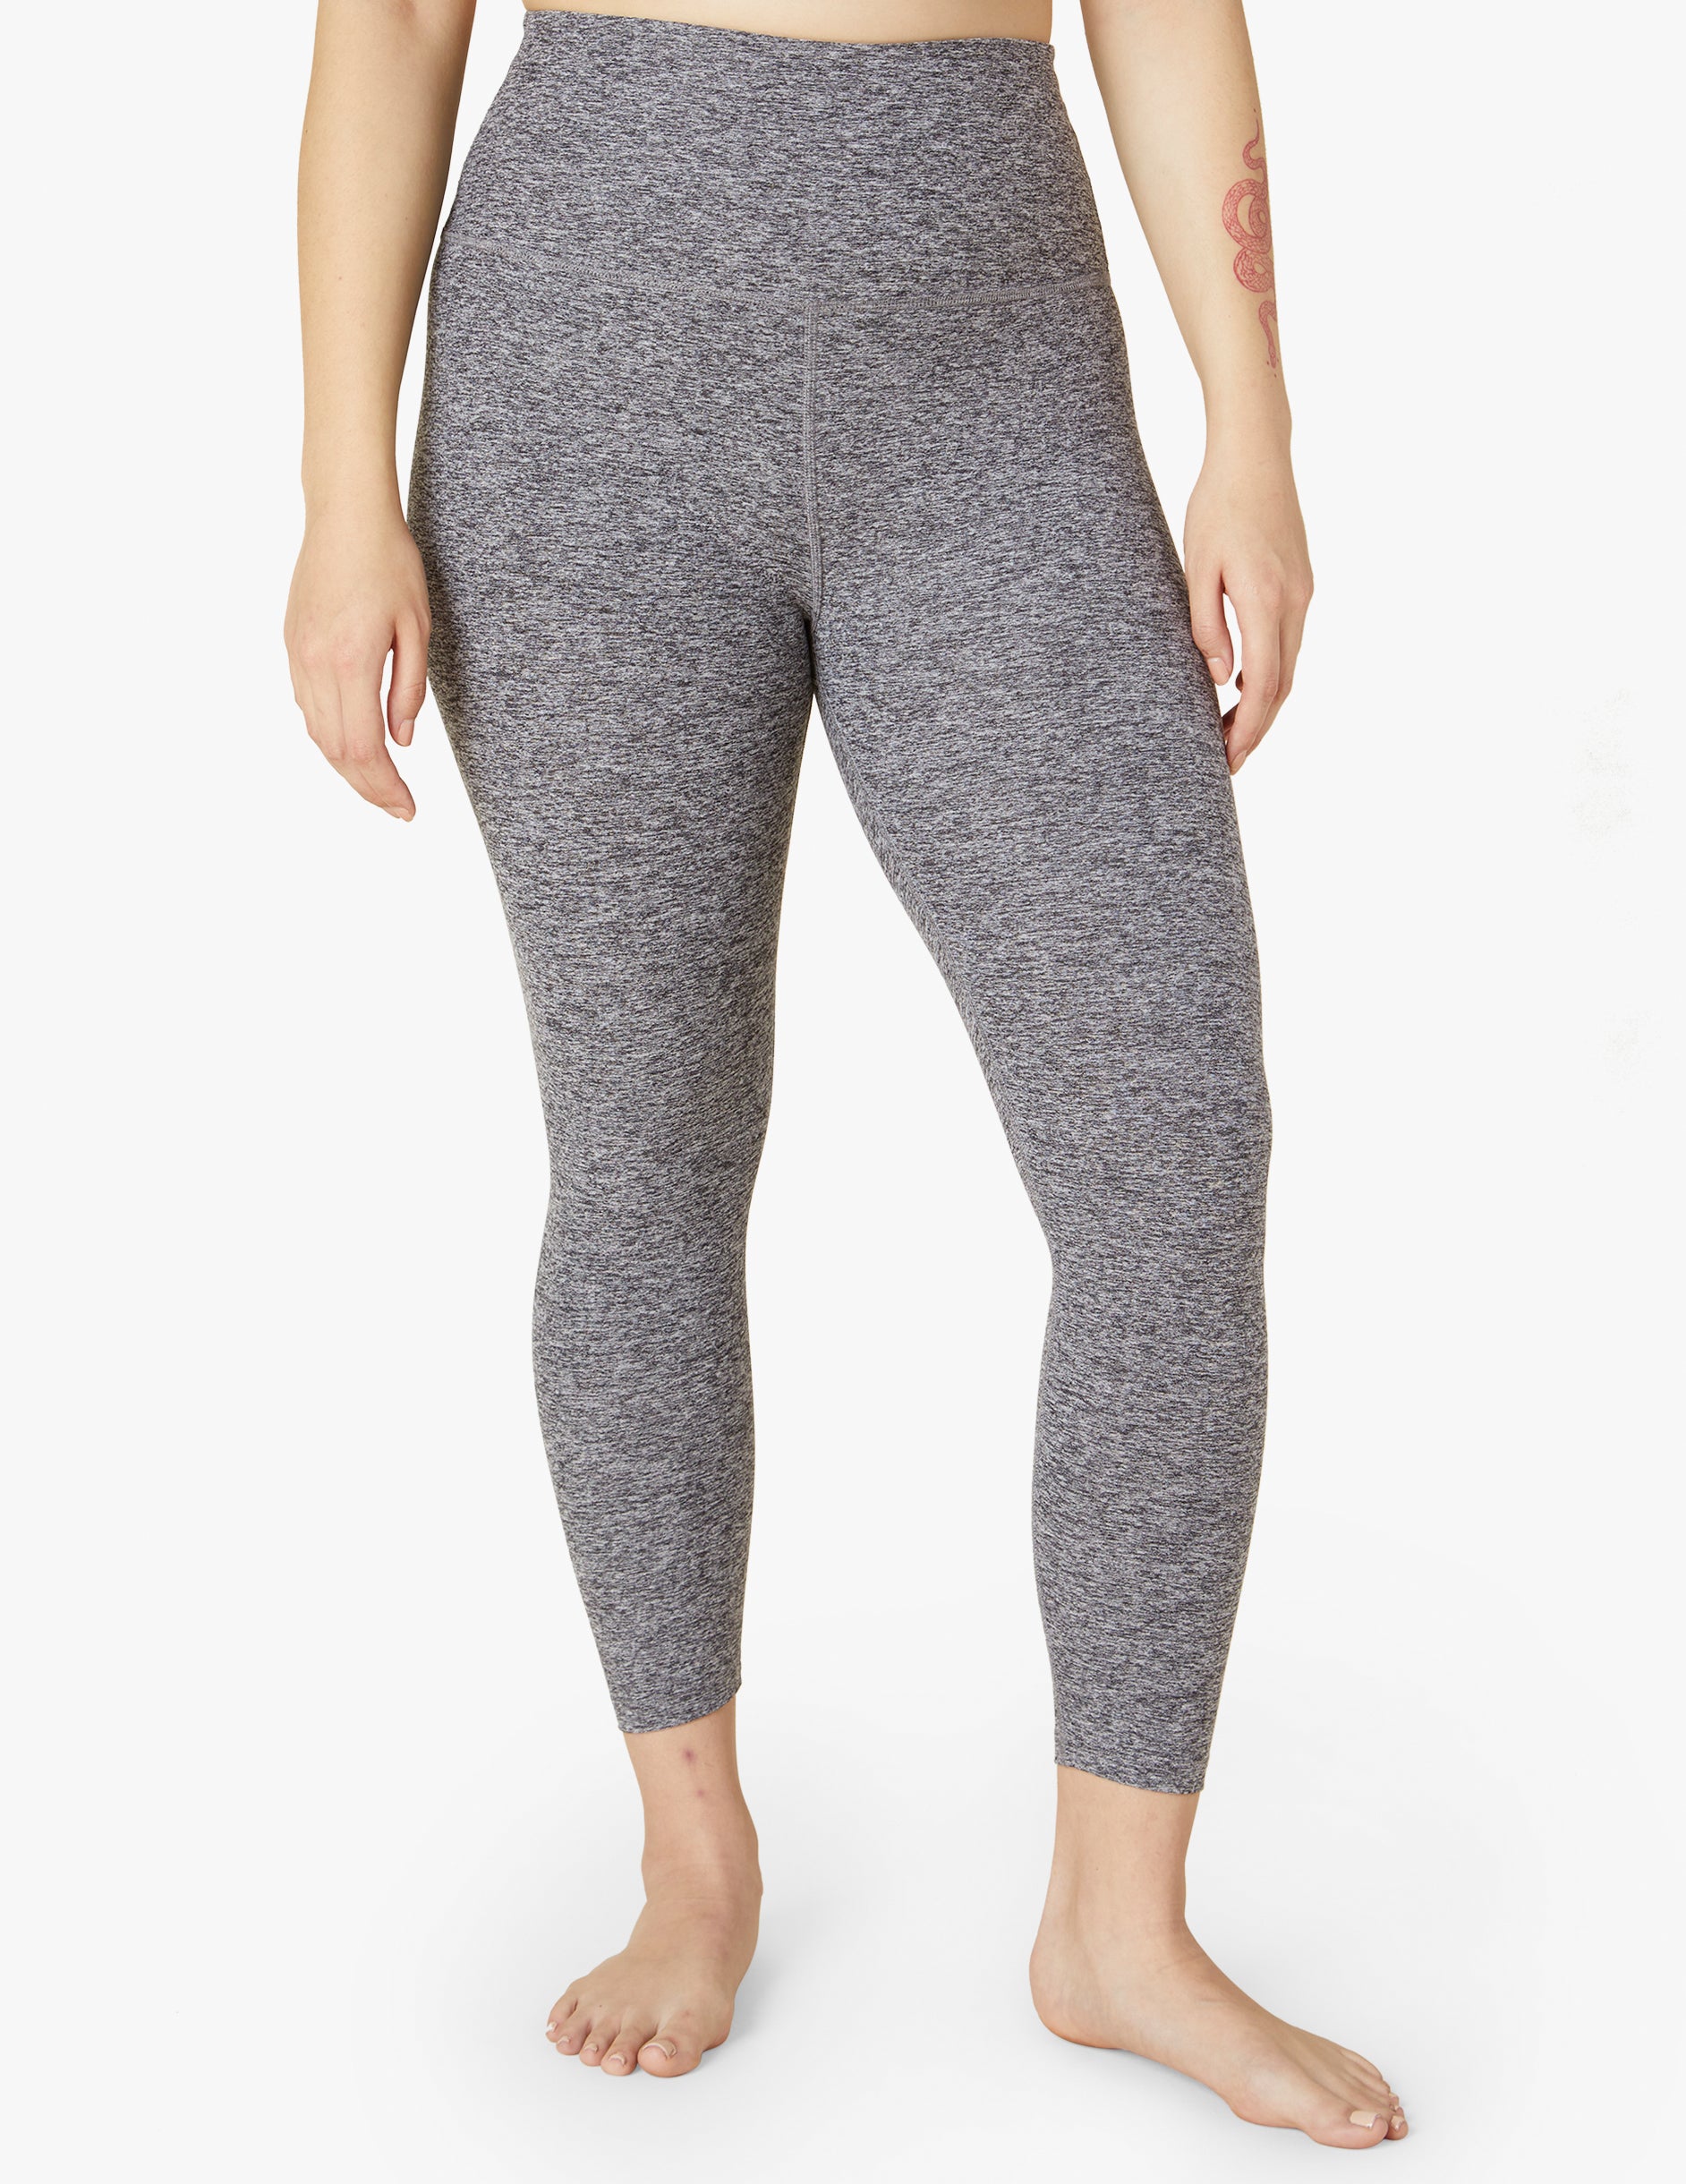 Beyond Yoga Spacedye Walk And Talk High Waisted Capri Legging Blue - $80  (15% Off Retail) New With Tags - From Maggie